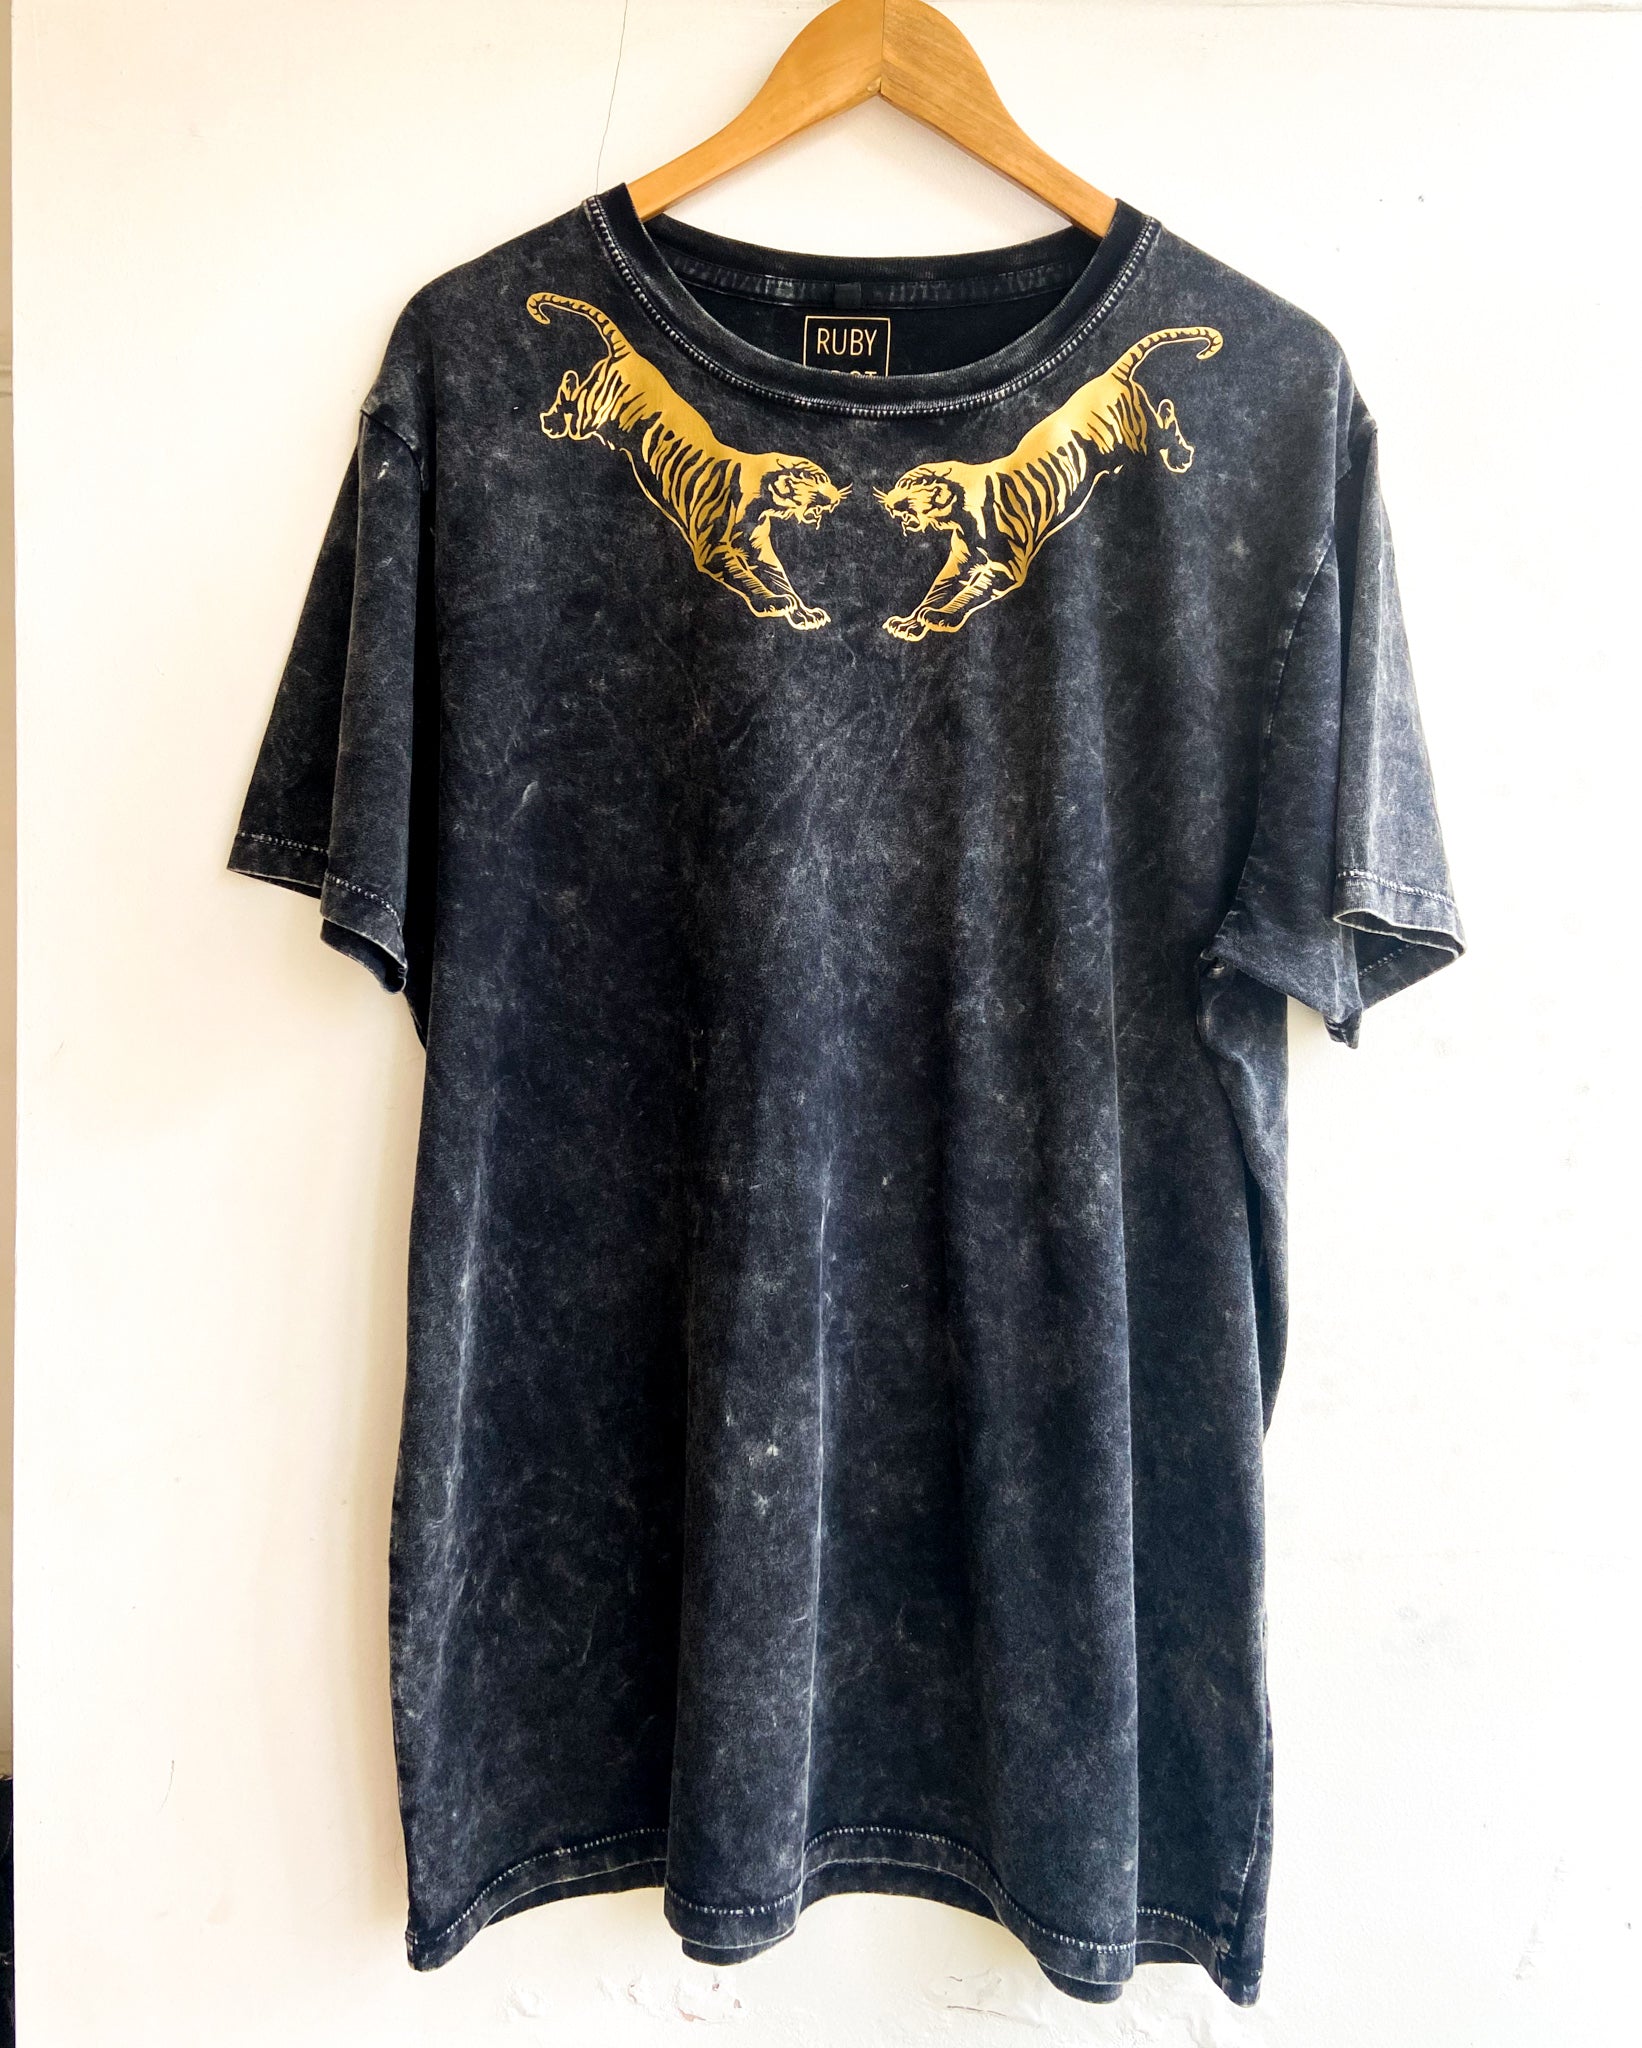 Long Length Acid wash T-shirt with gold tigers